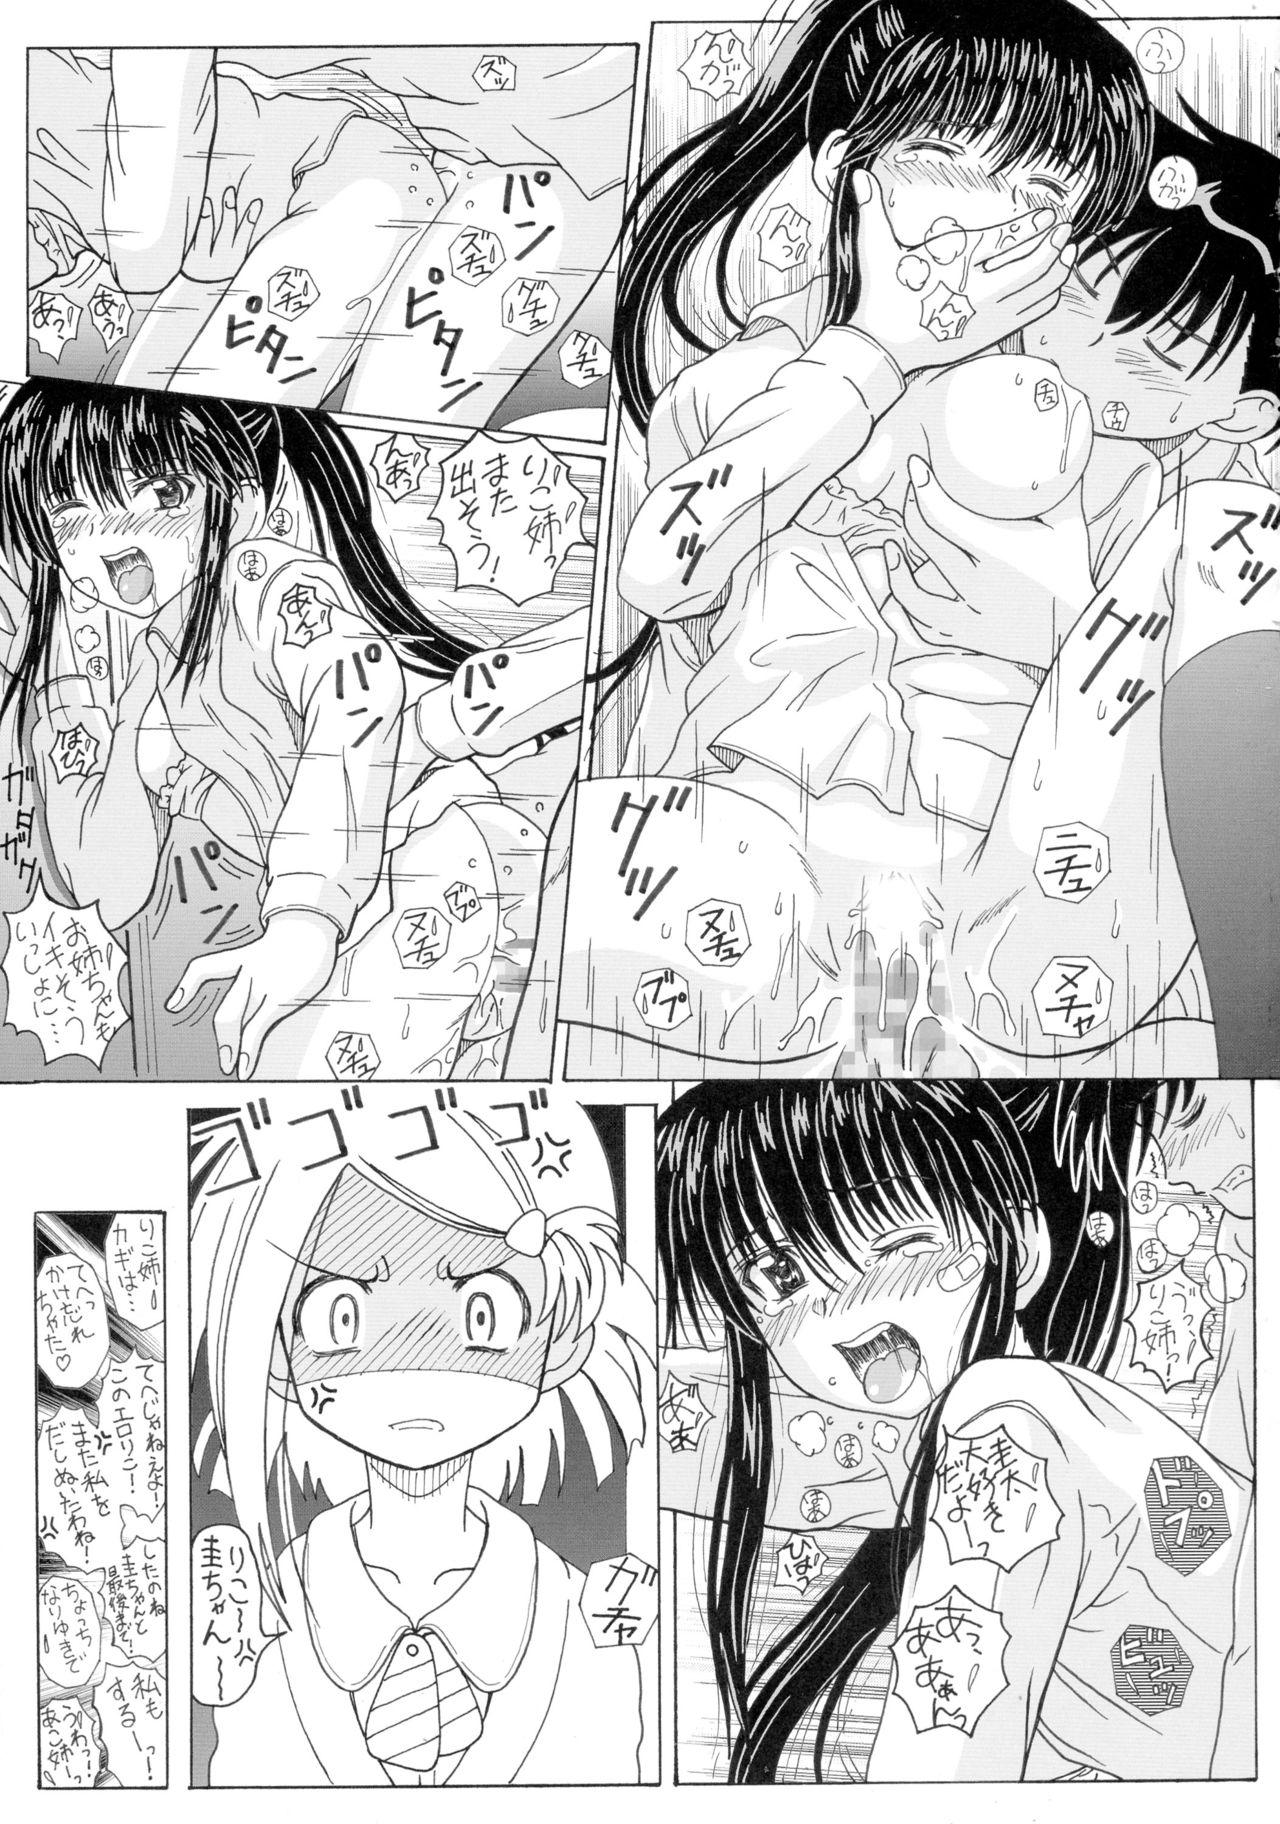 Cameltoe The Onee-chans - Kiss x sis Lesbians - Page 25